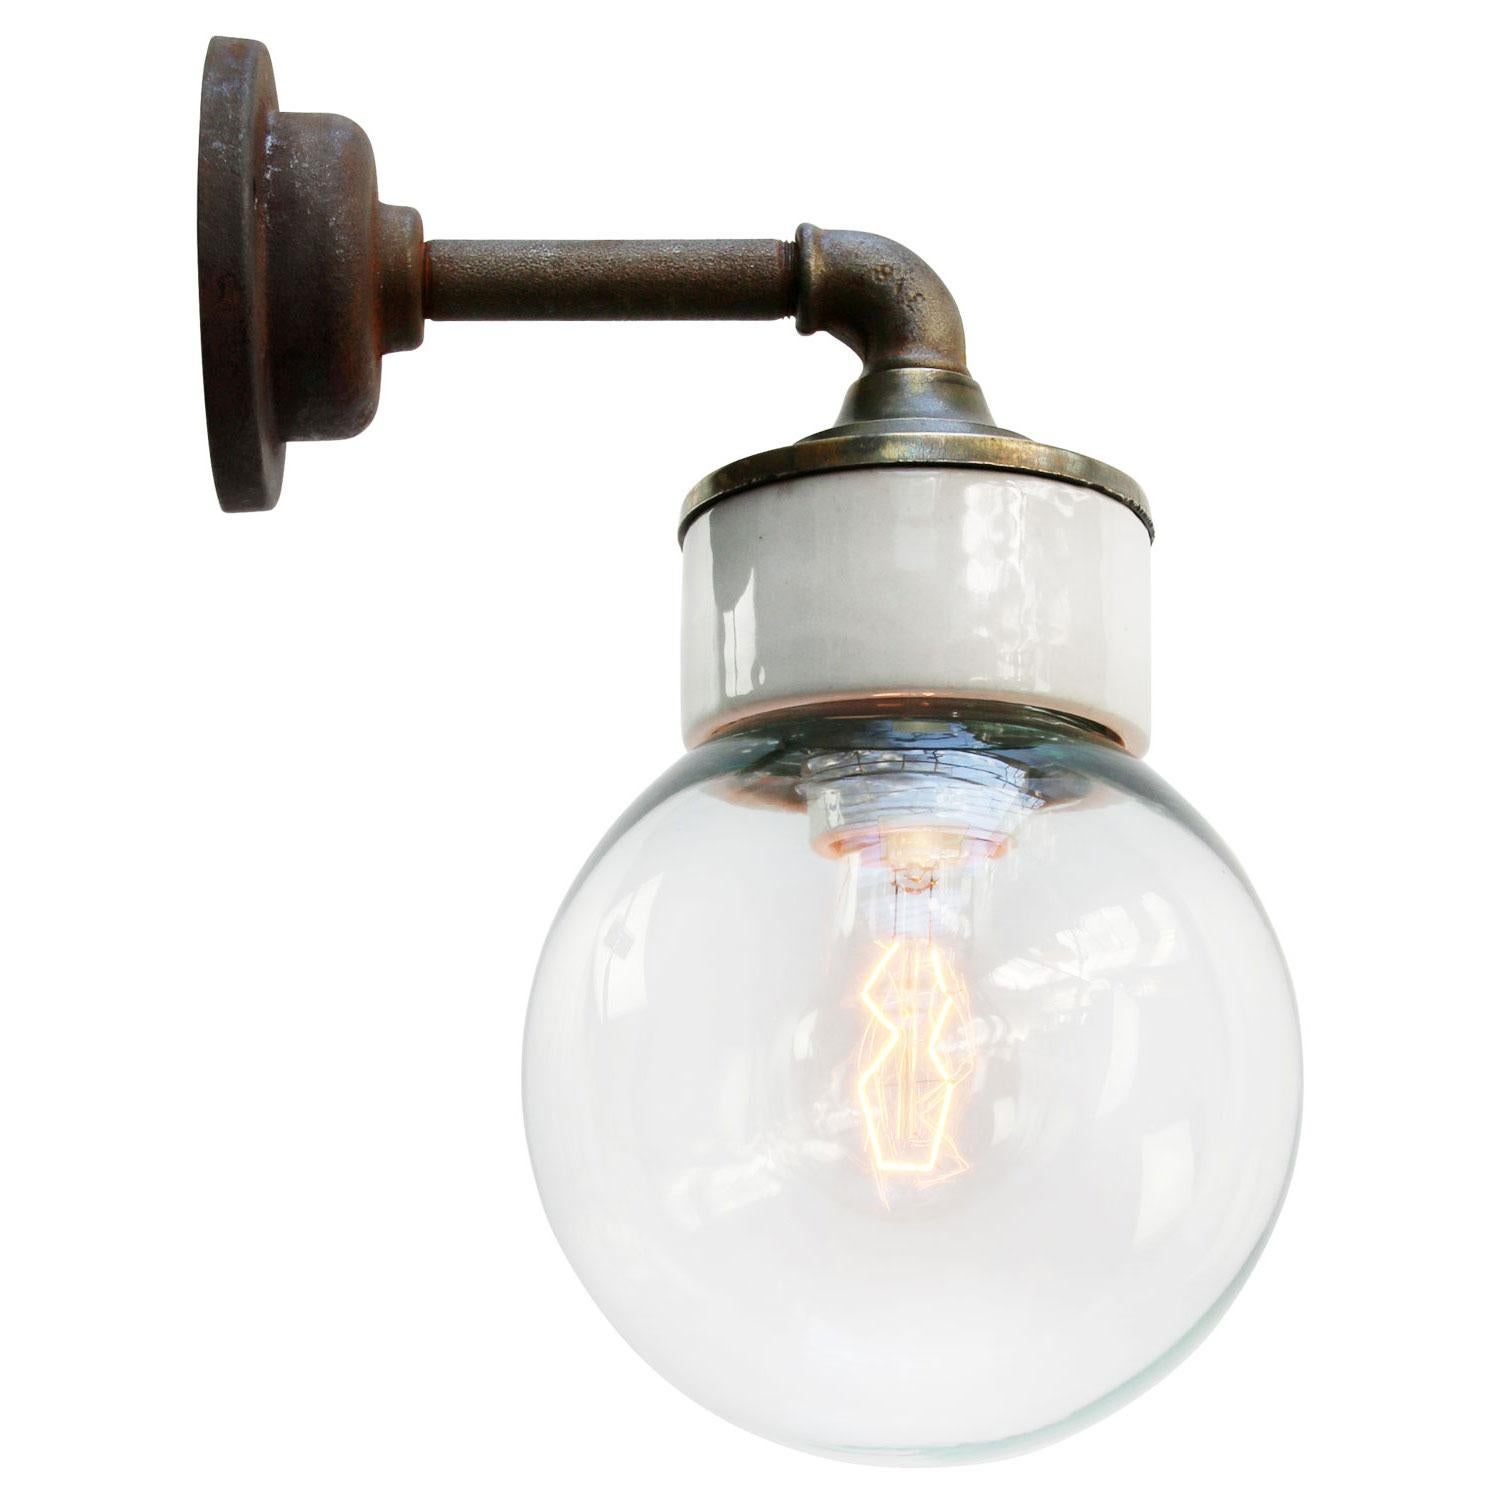 Porcelain Industrial wall lamp.
White porcelain, brass and cast iron
Clear glass.
2 conductors, no ground.

Diameter wall mount 10.5 cm / 4”

for use inside only

Measures: Weight: 2.05 kg / 4.5 lb

Priced per individual item. All lamps have been